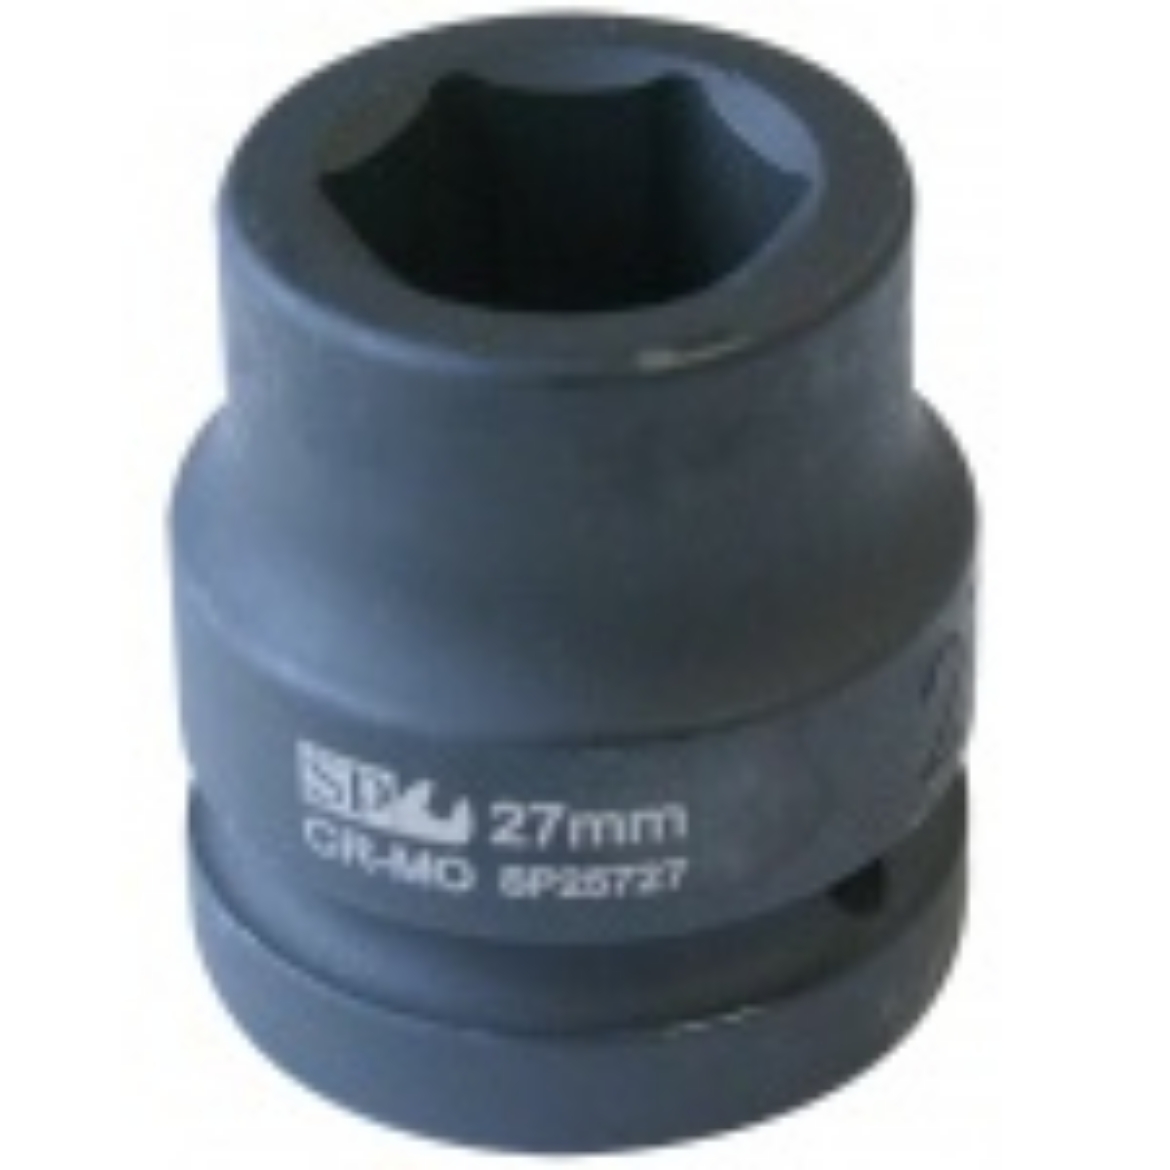 Picture of SOCKET IMPACT 1"DR 6PT METRIC 100MM SP TOOLS